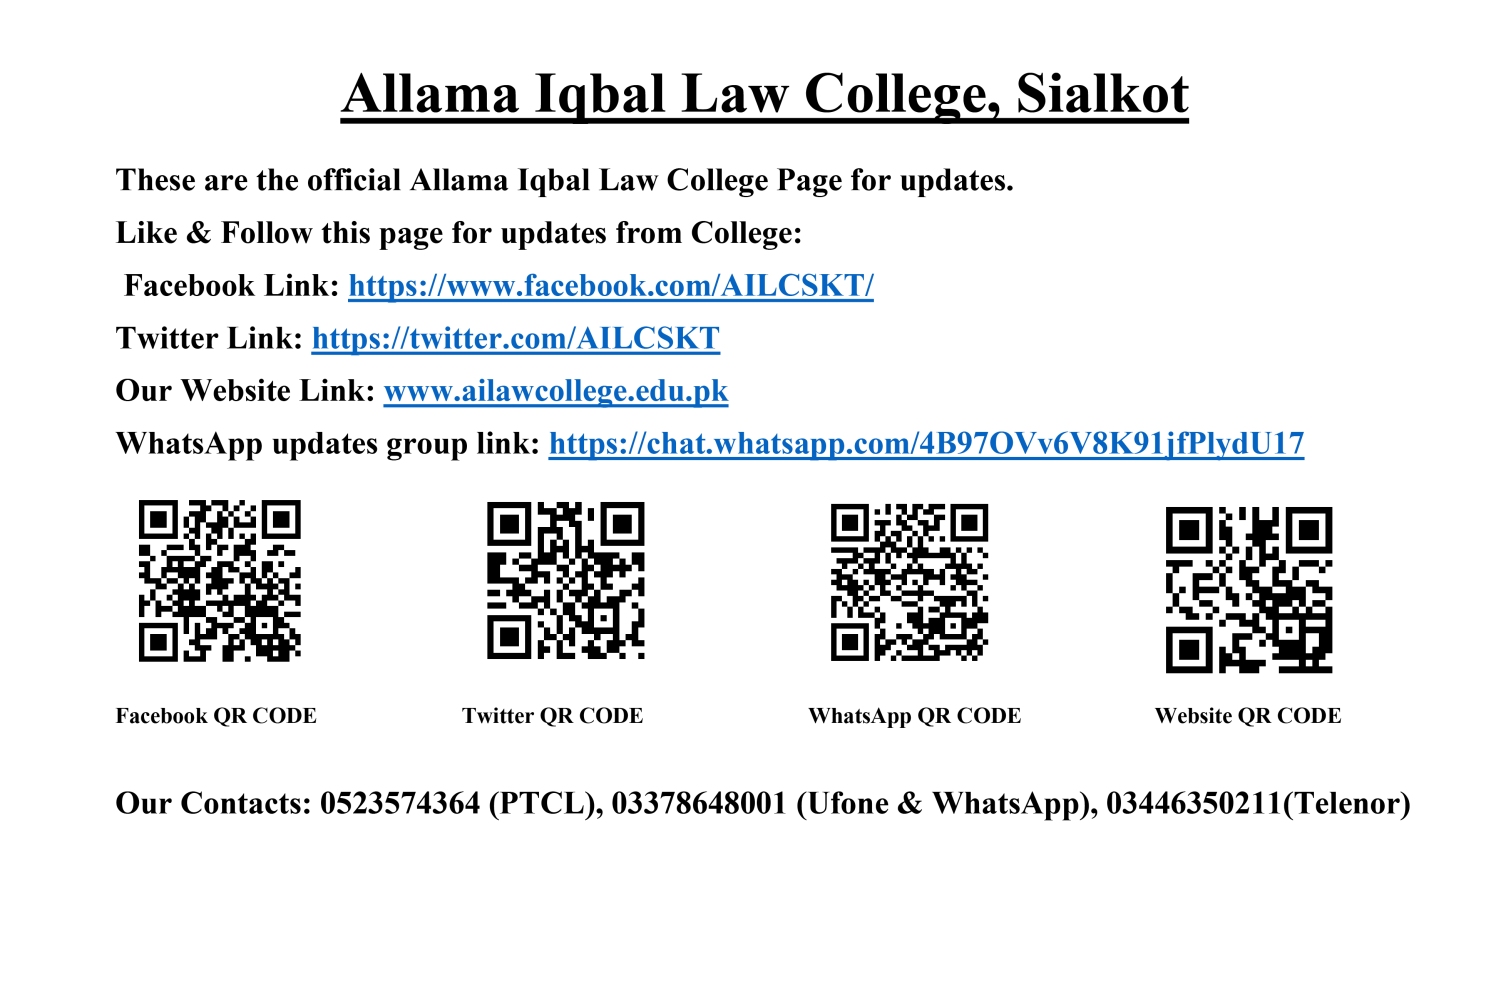 These are the official Allama Iqbal Law College Page for updates